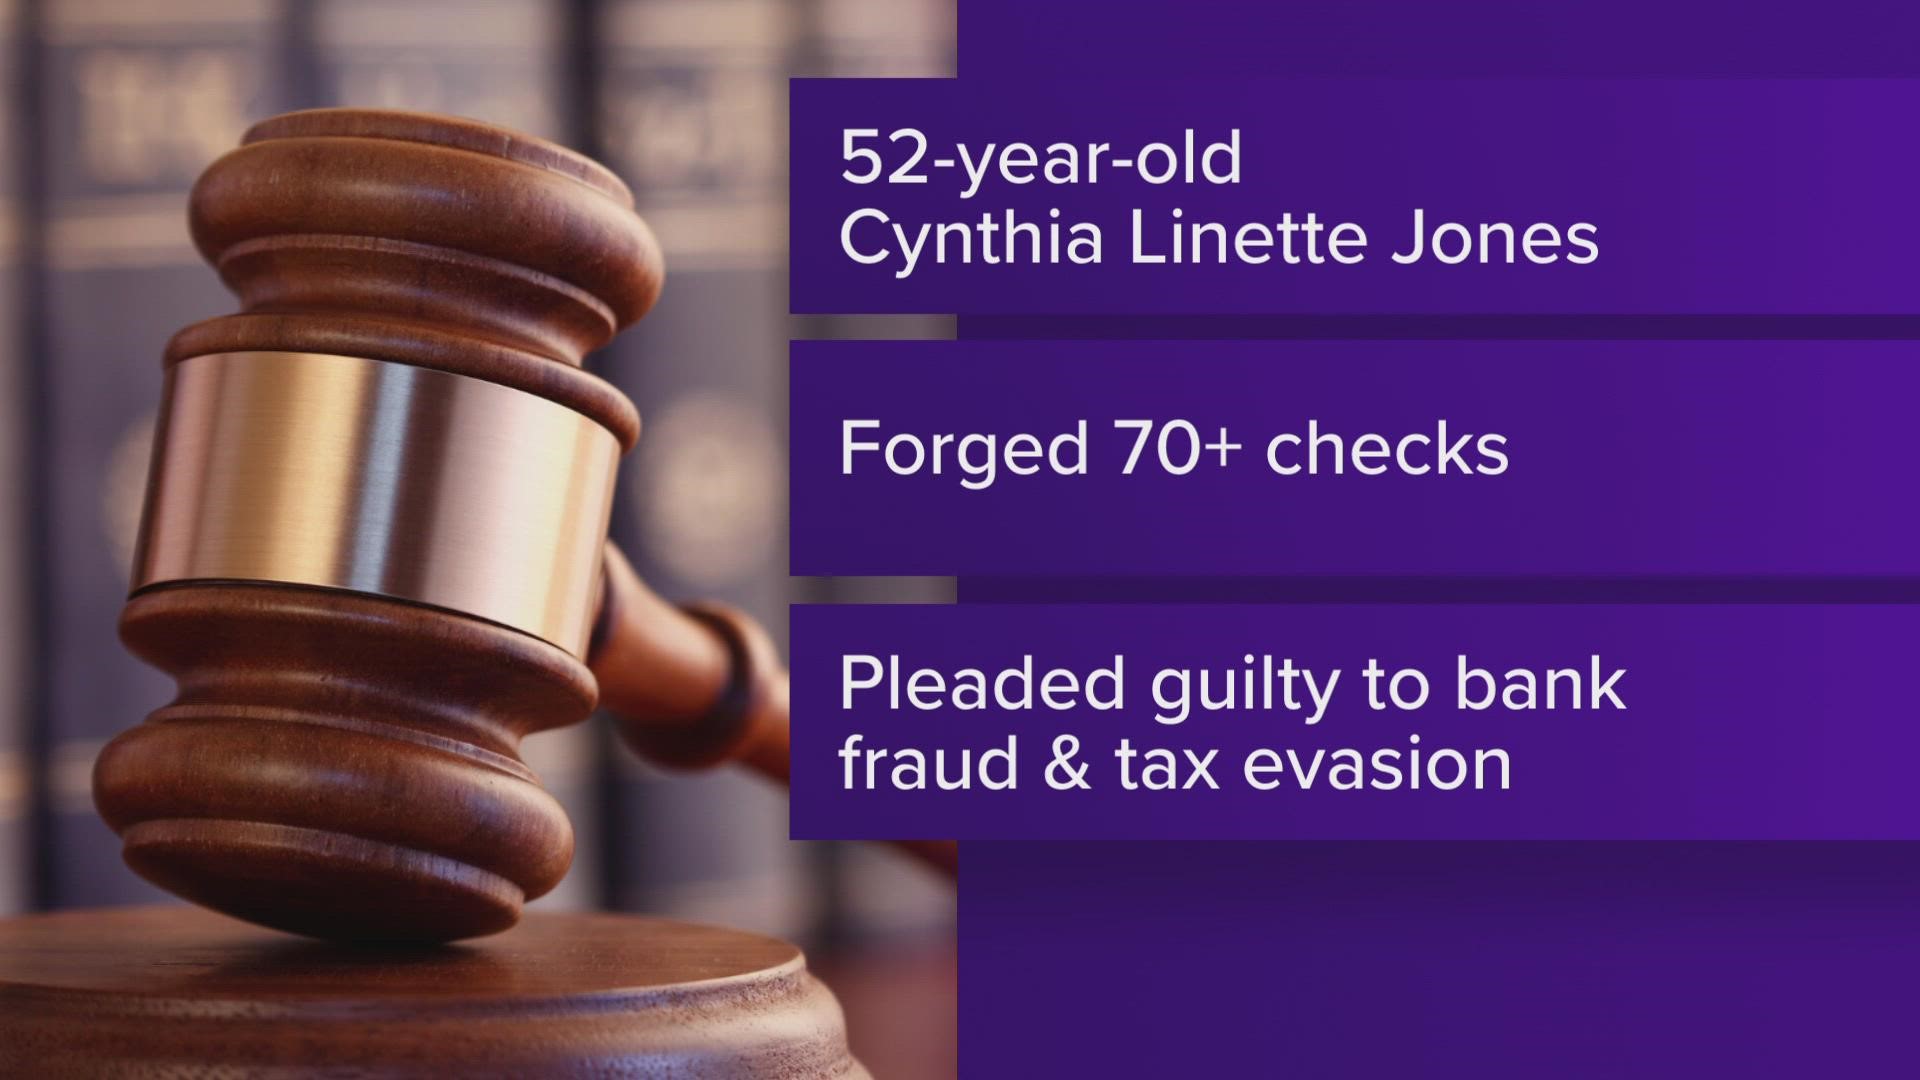 Cynthia Linette Jones, 52, forged checks at her job in Central Texas from 2012 to 2018.